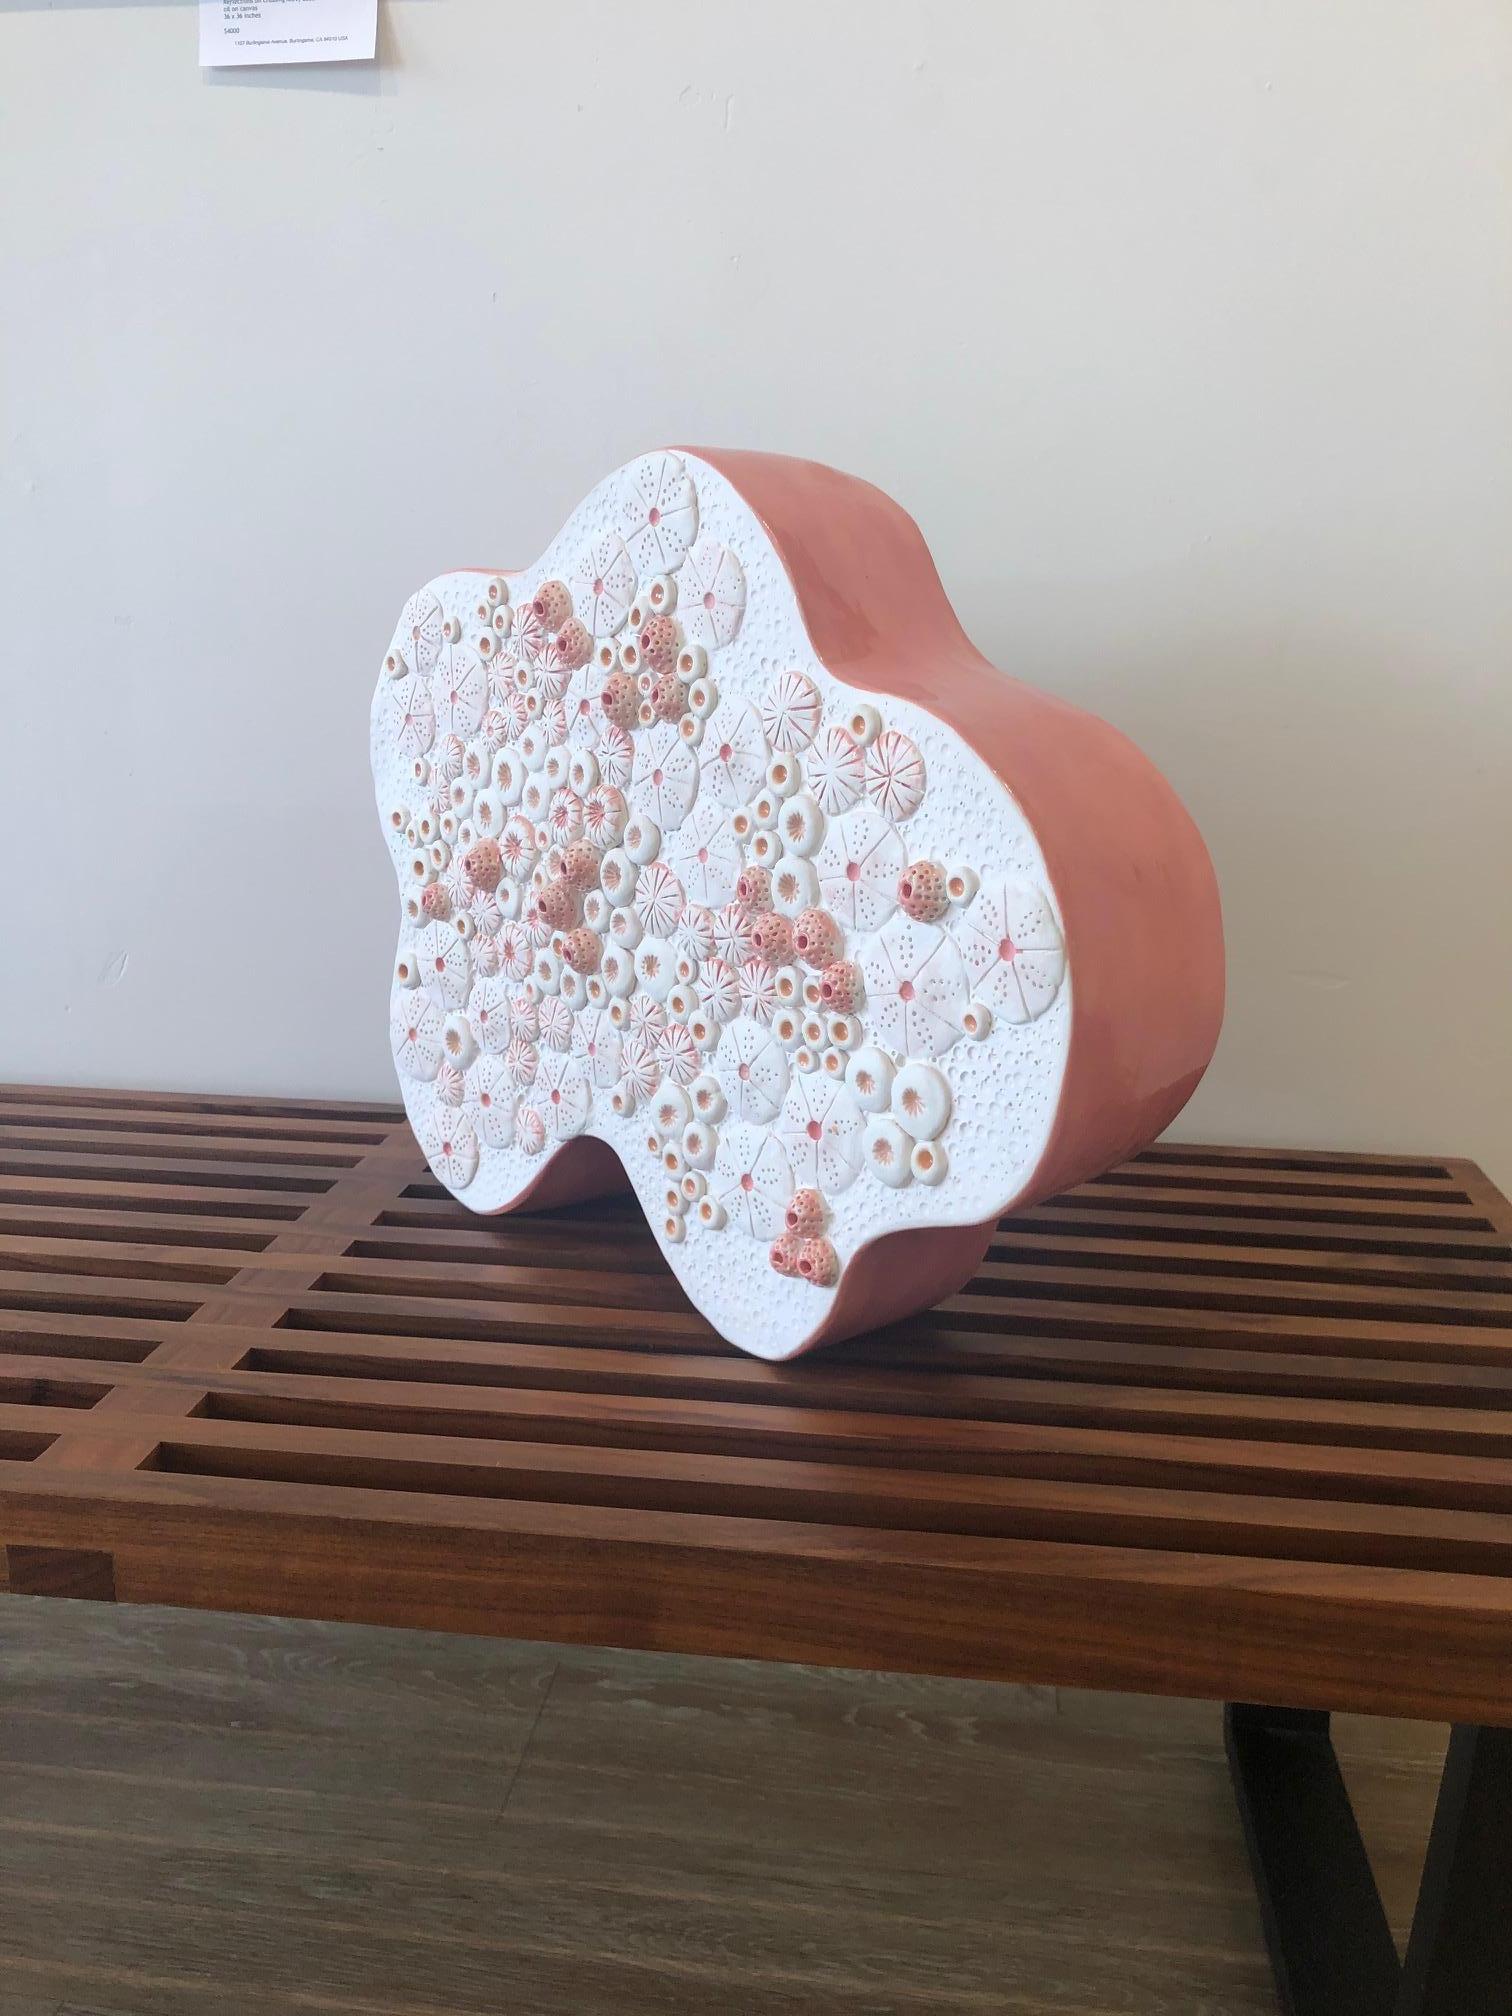 Coral XVIII / coral inspired ceramic sculpture For Sale 2